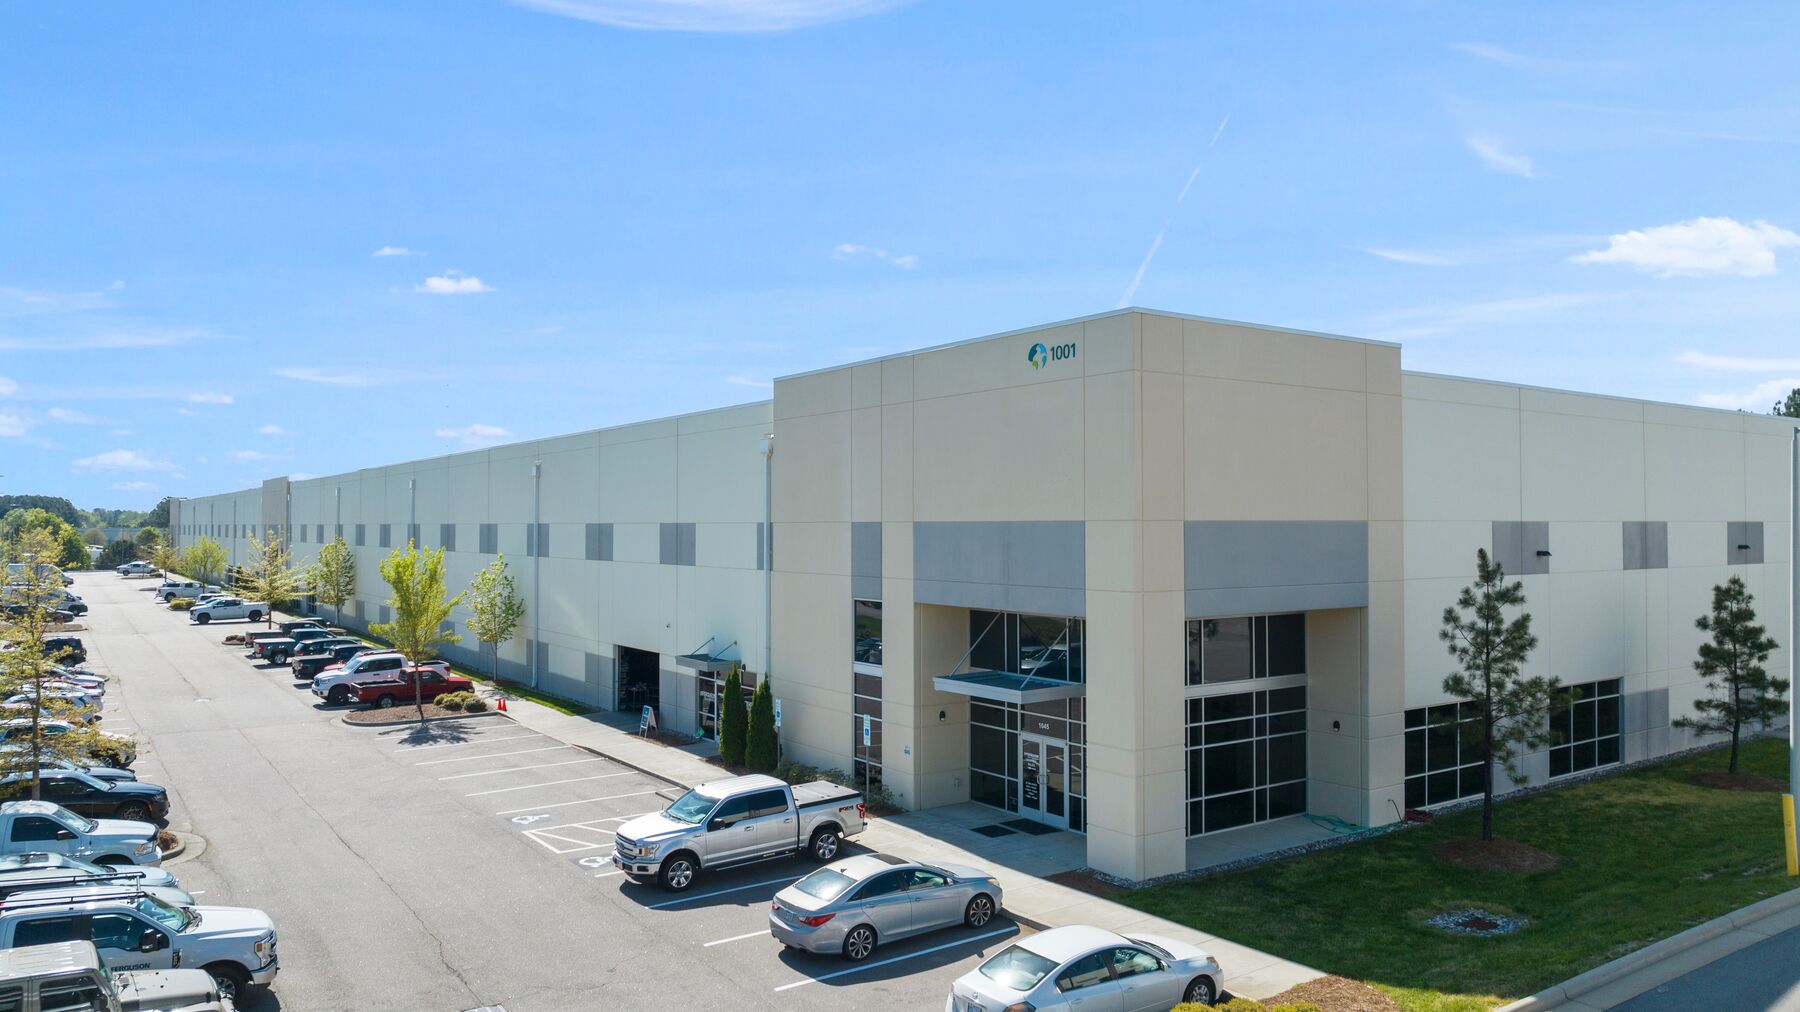 DPM-Prologis-Greenfield-North-1001_Building-Exterior.jpg